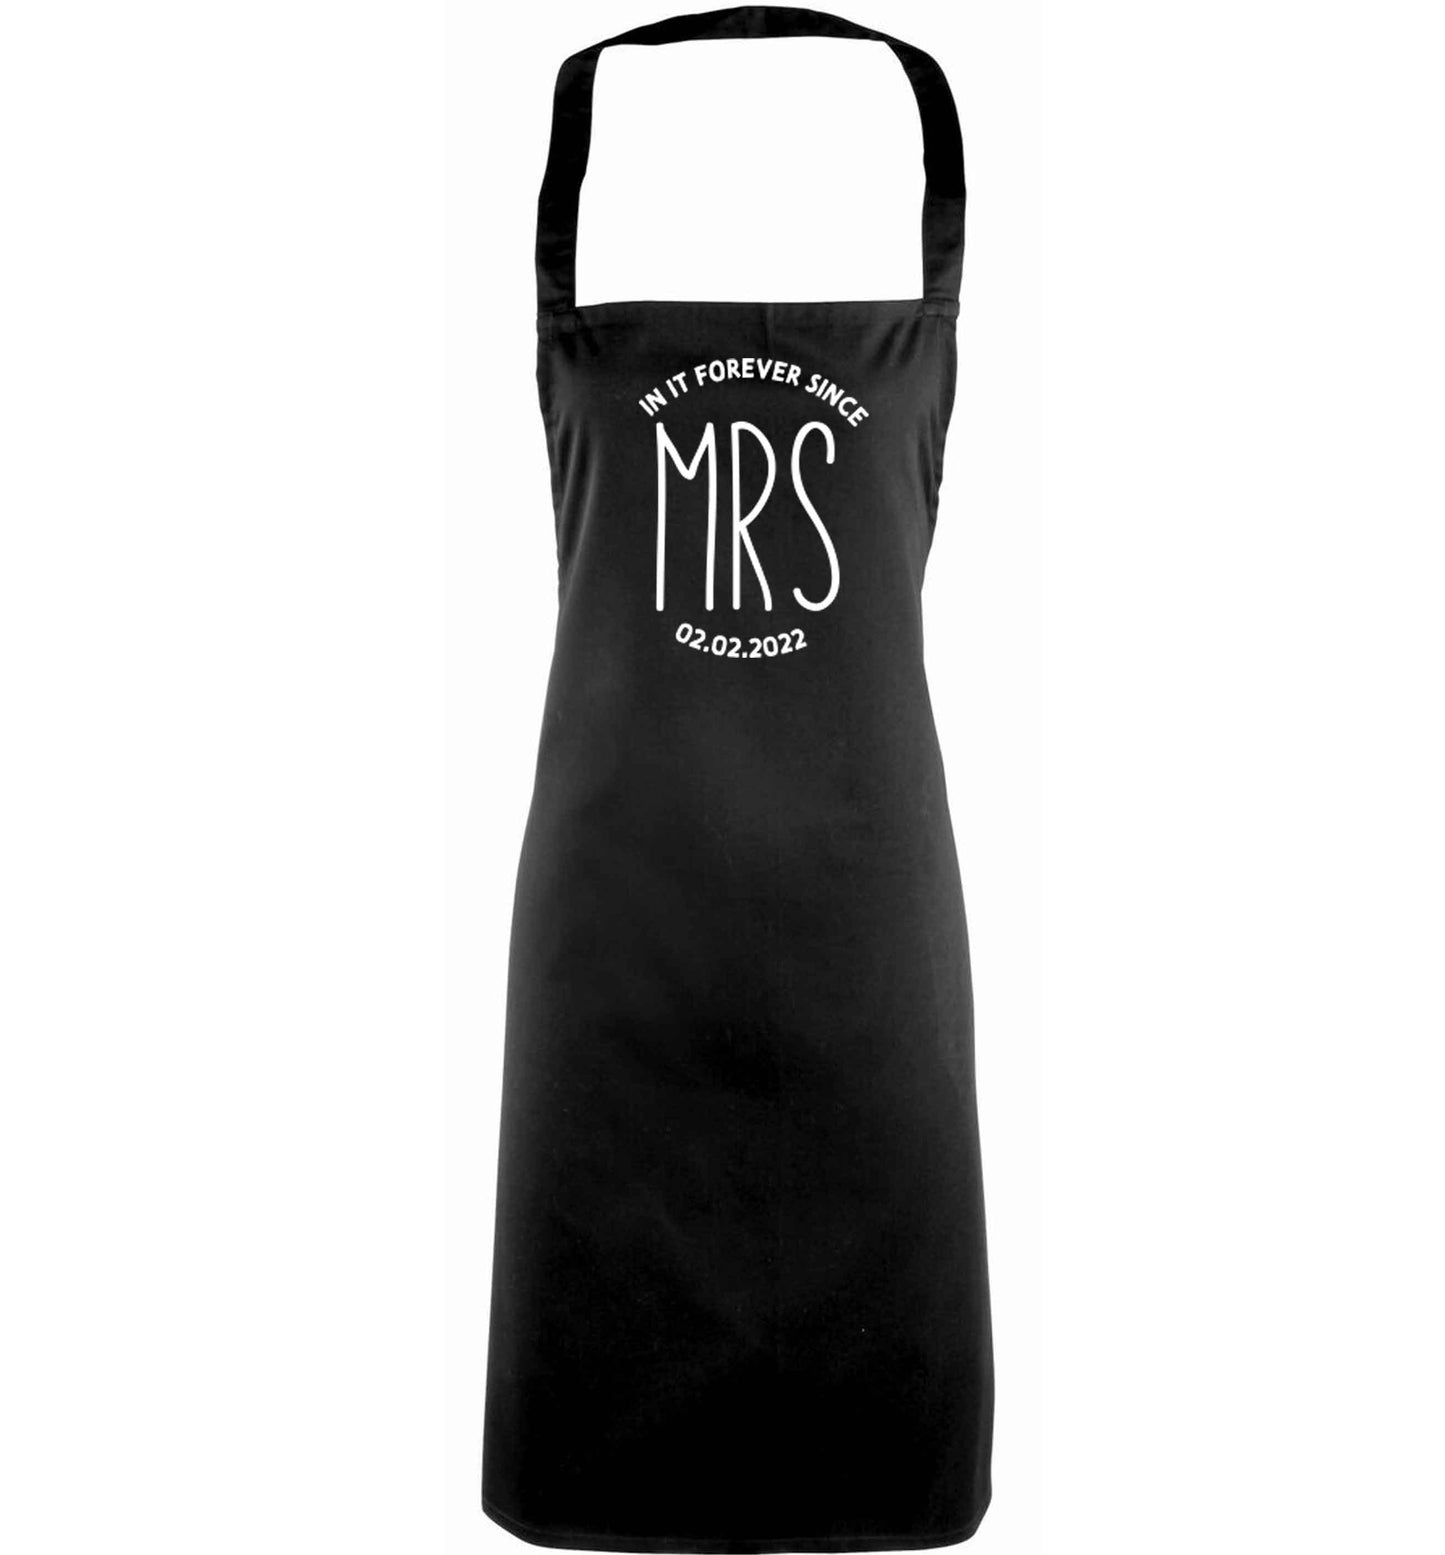 Funny matching gifts for him and her! Get matchy matchy, ideal for newlywed couples or a little valentines gift! adults black apron